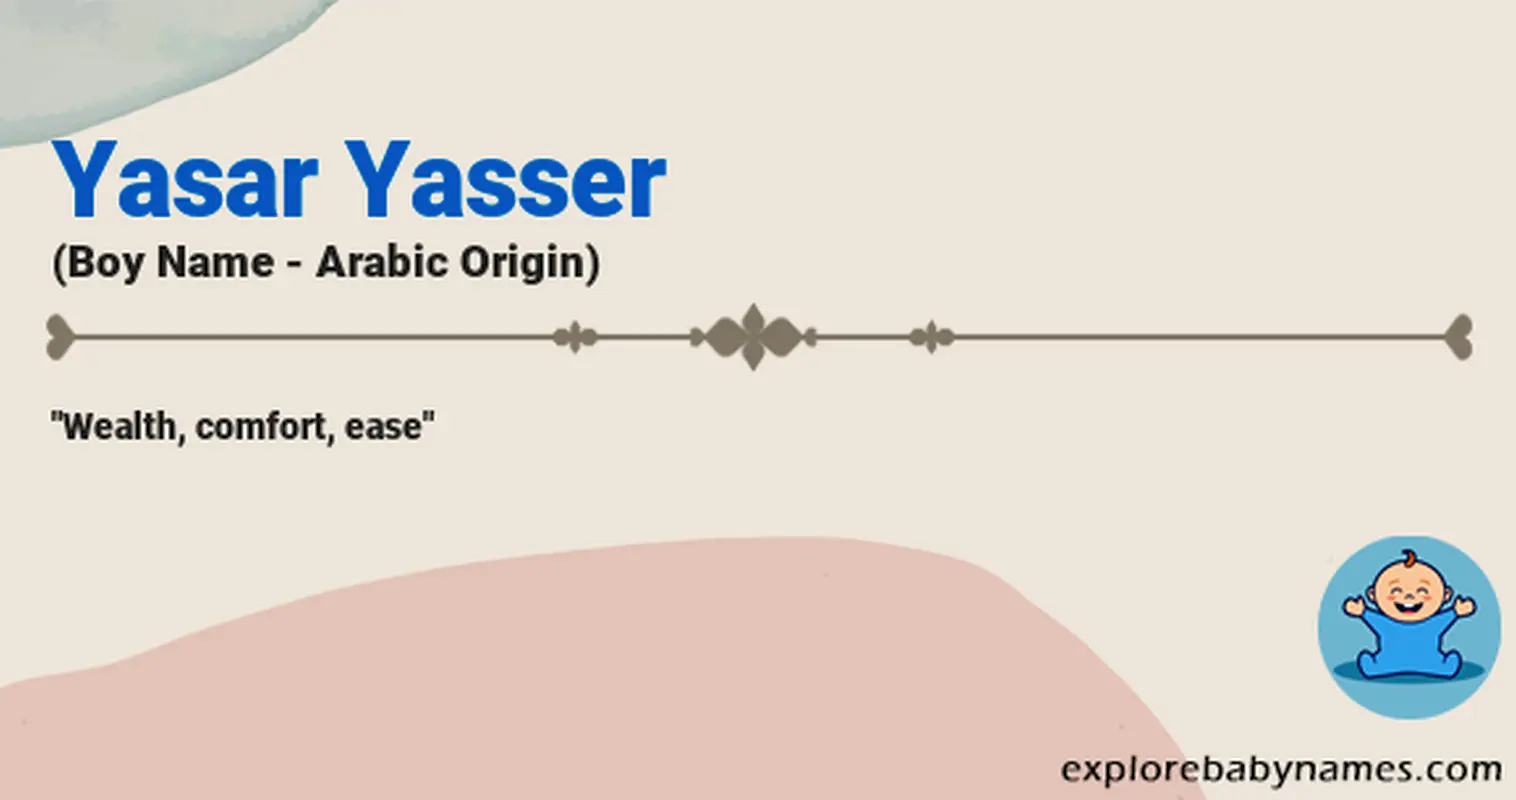 Meaning of Yasar Yasser